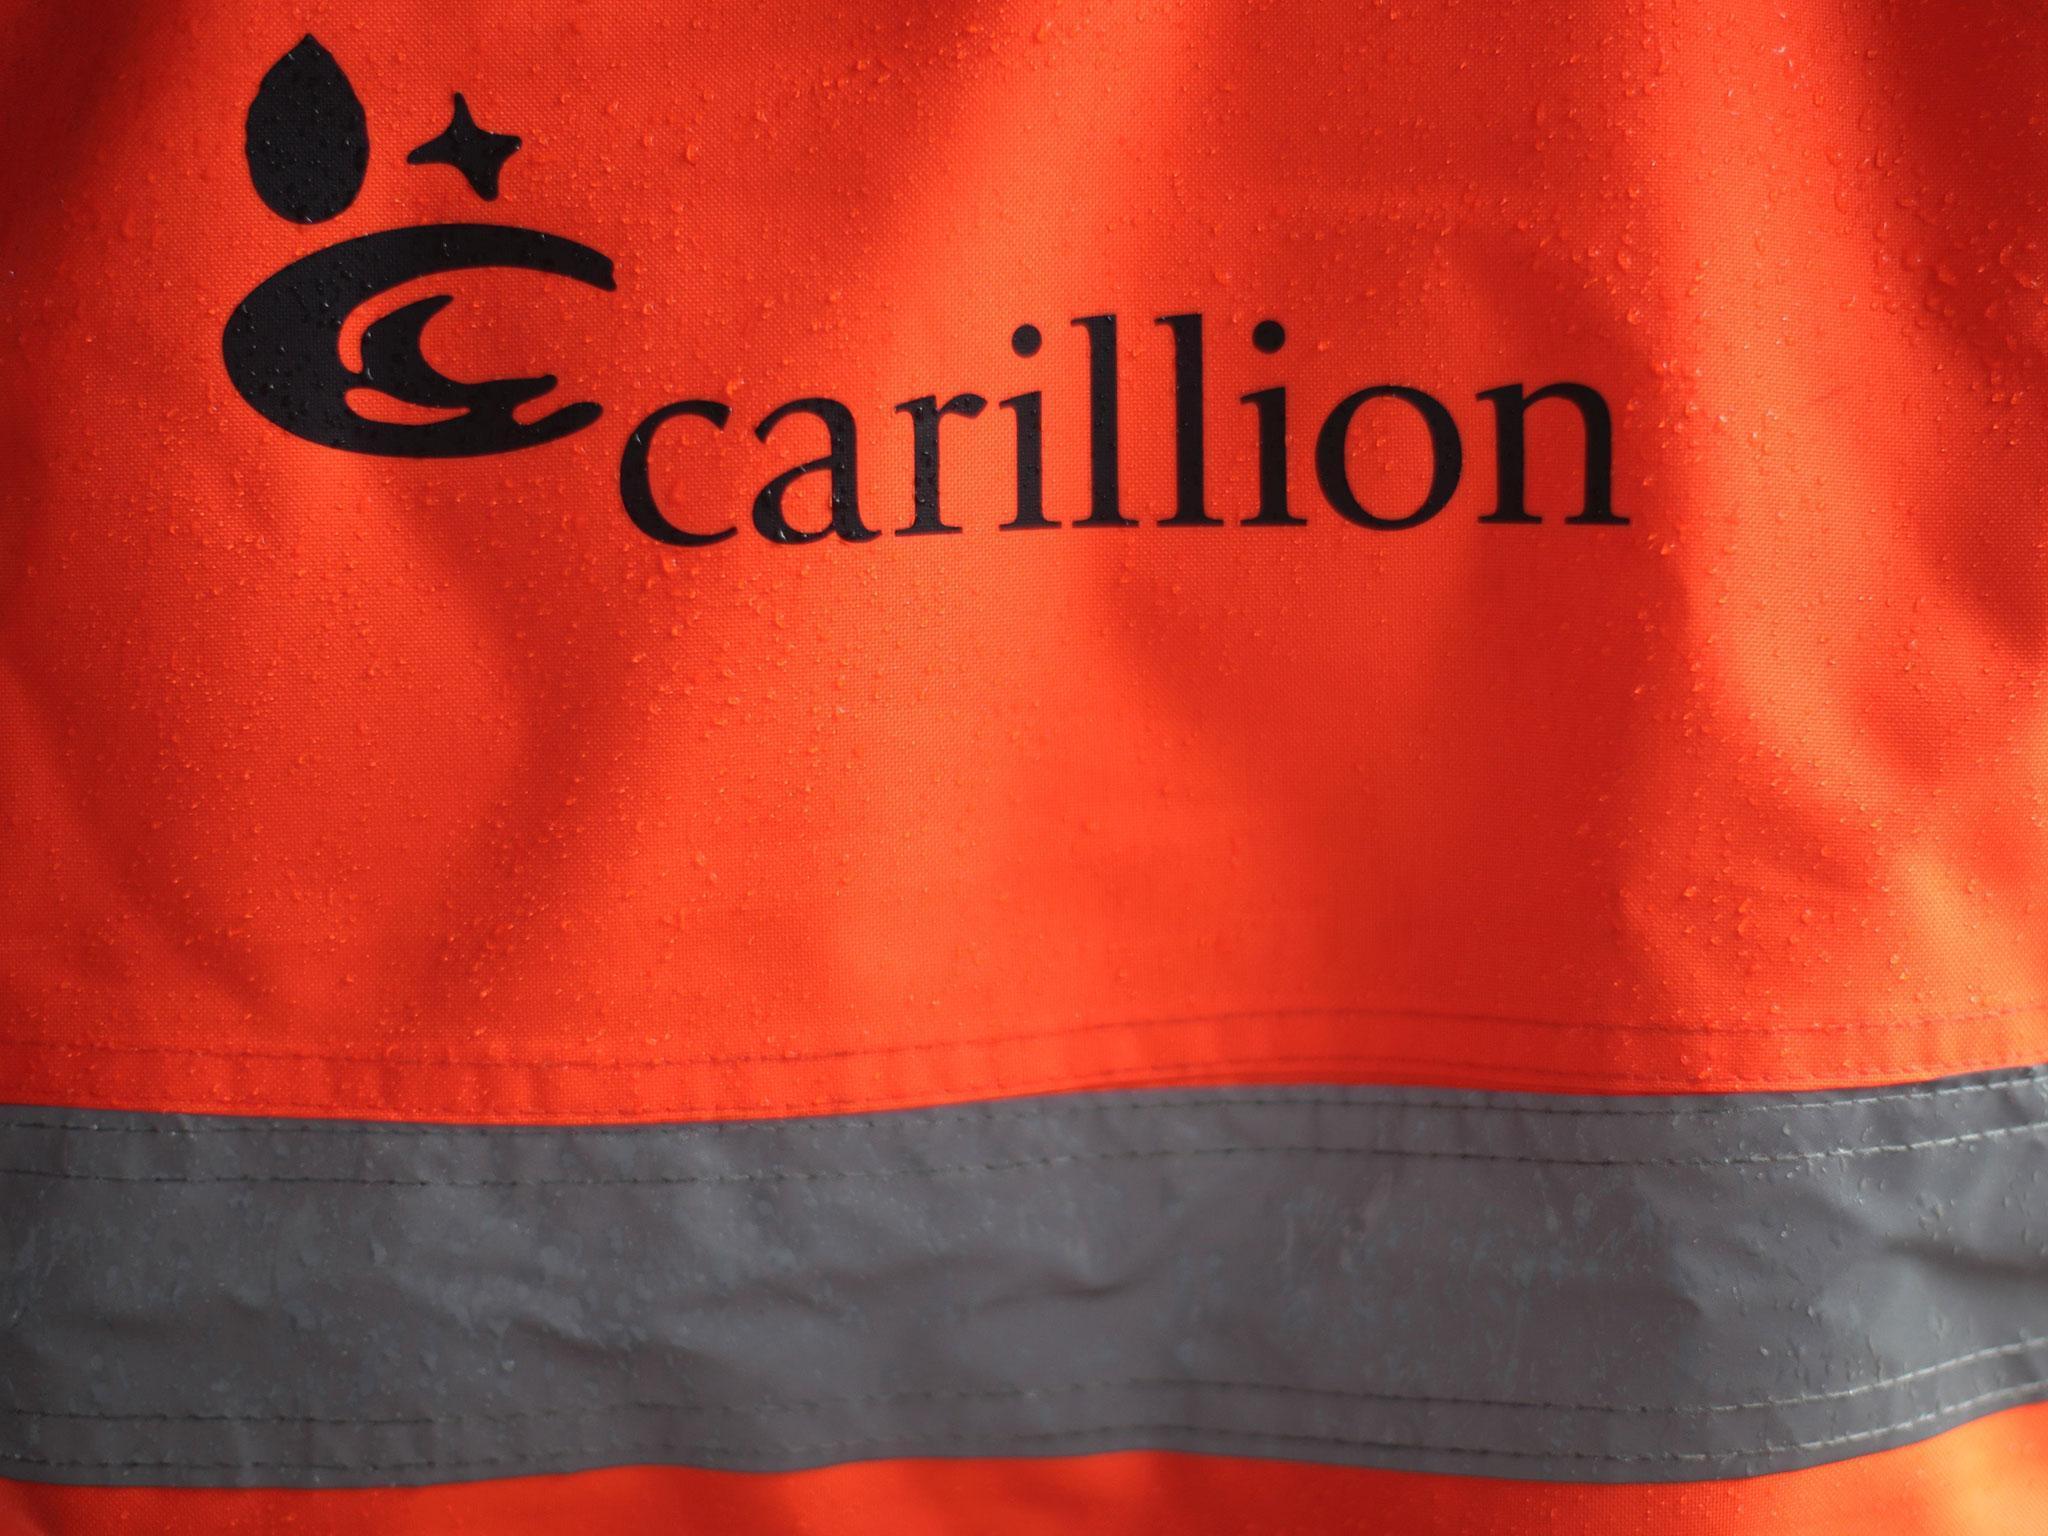 Just over 3,000 employees are currently retained to enable Carillion to deliver the remaining services it is providing